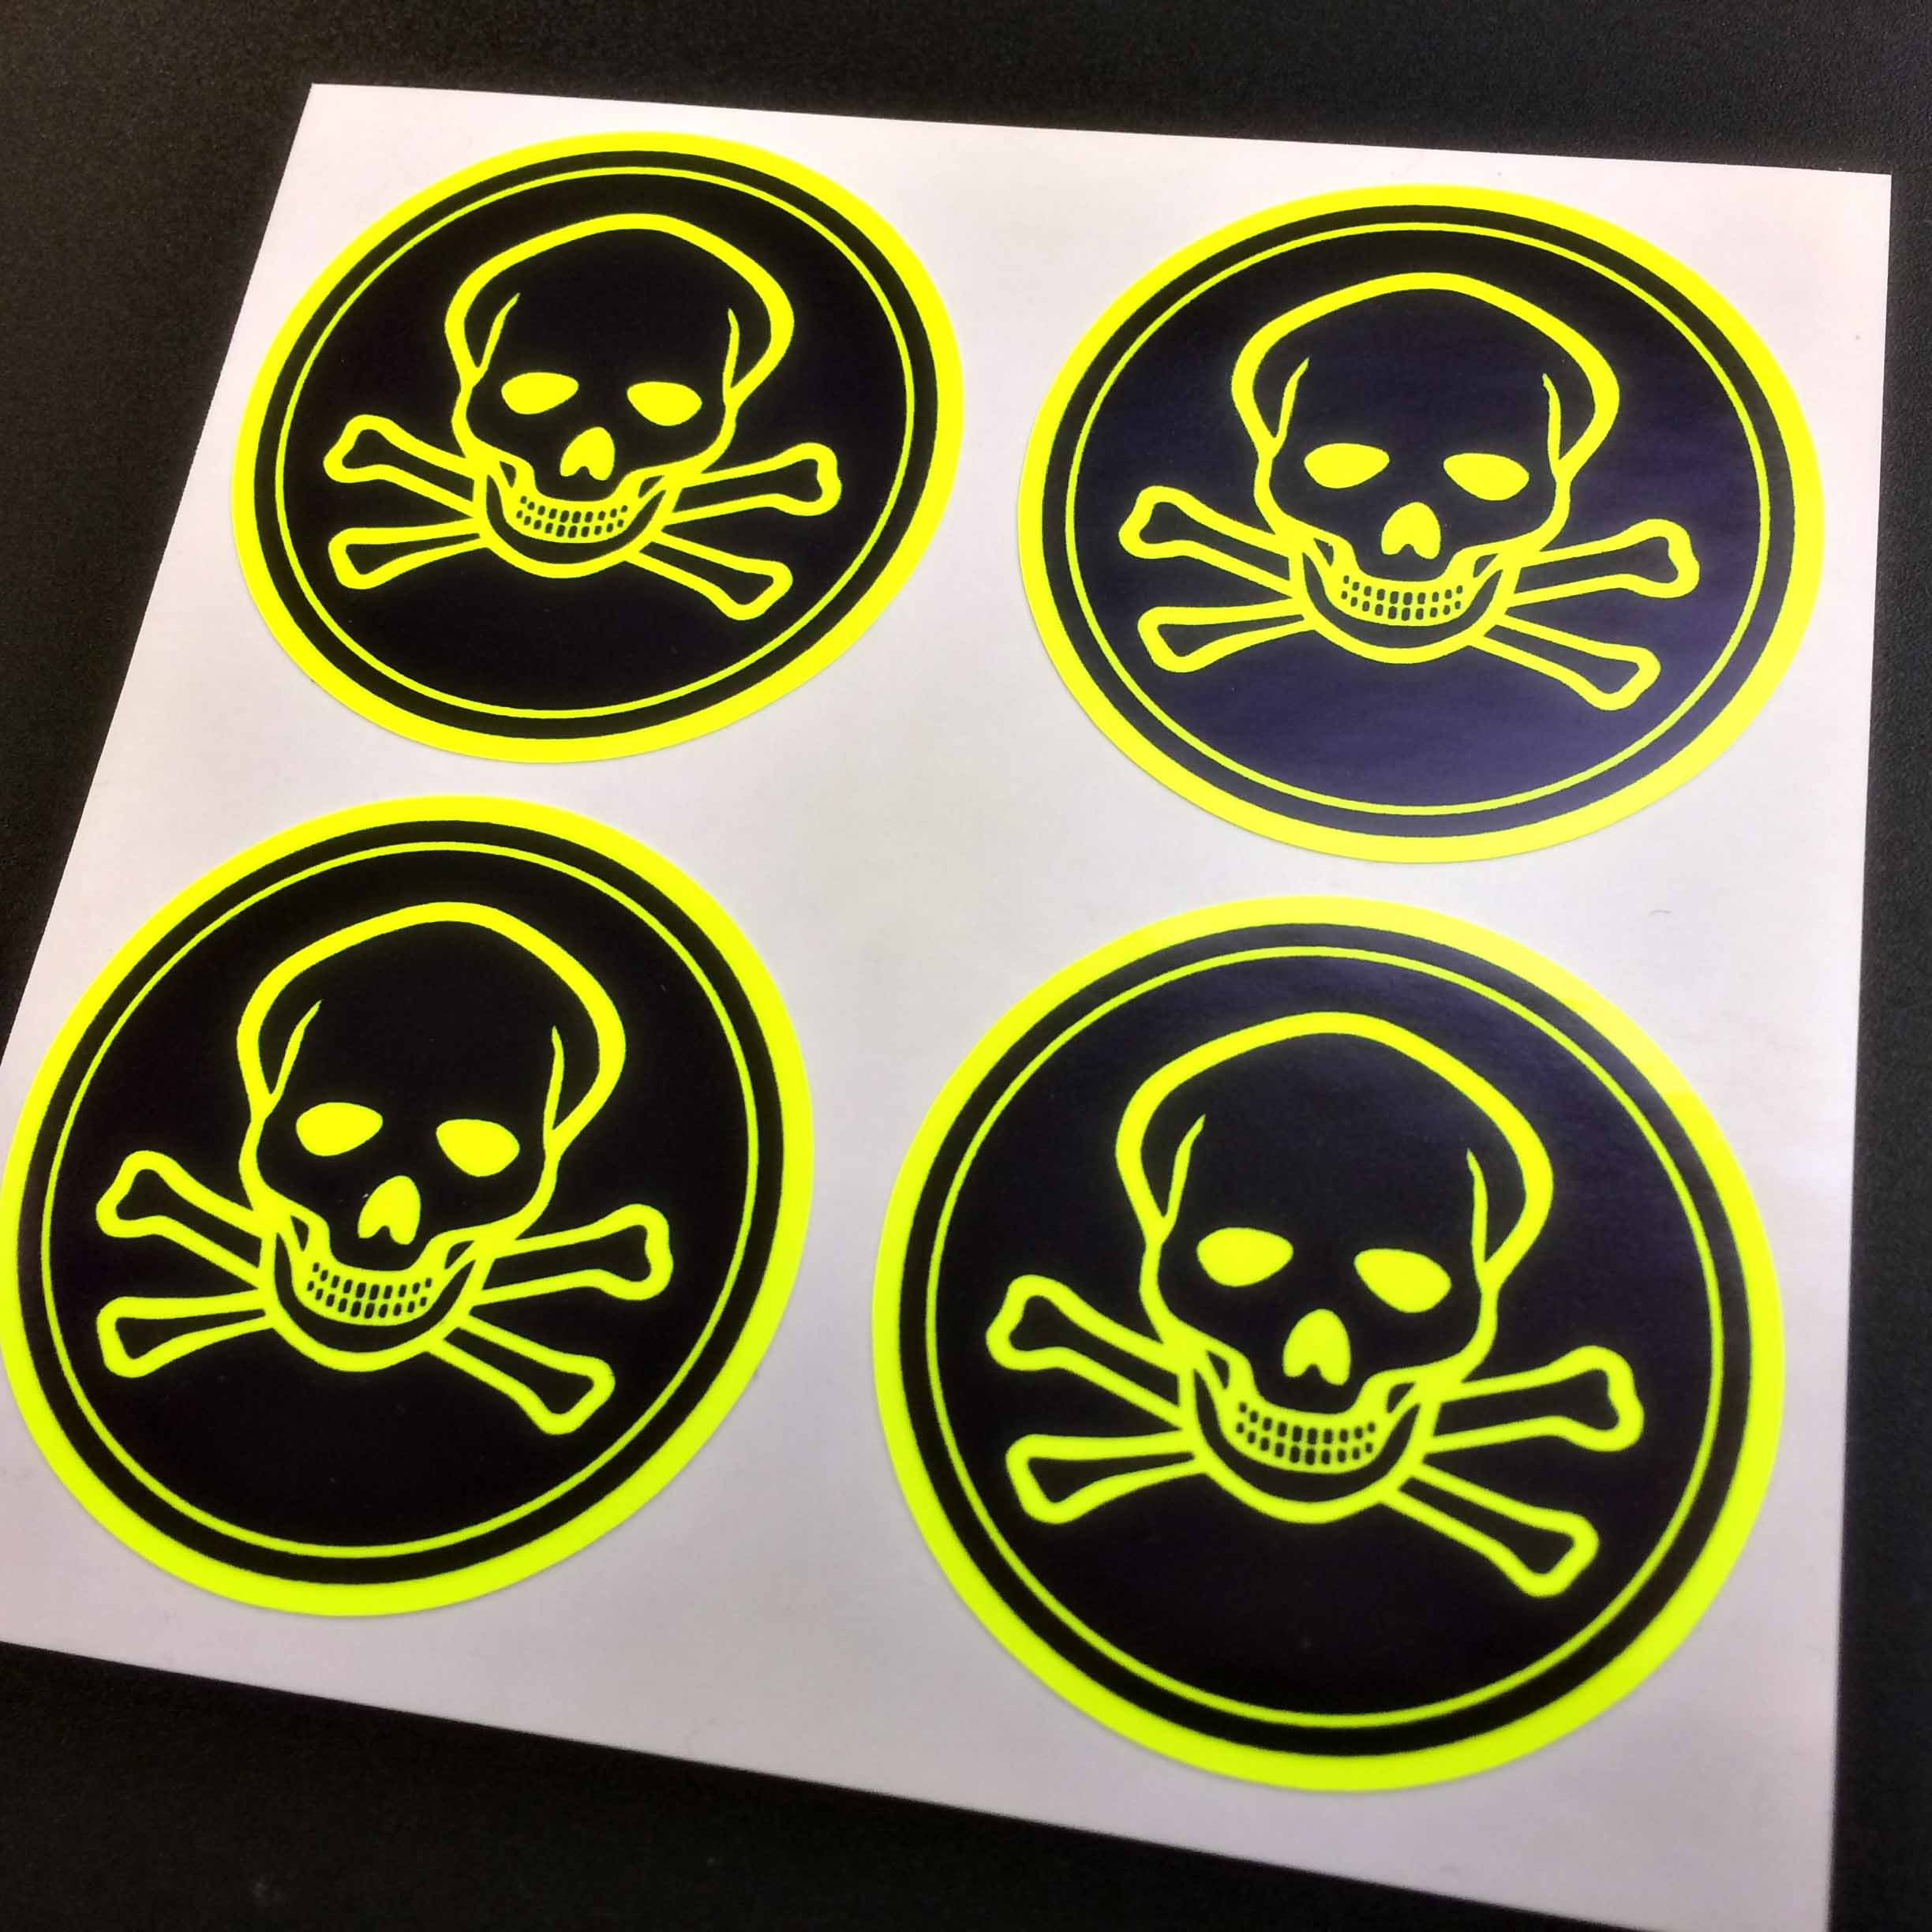 A fluorescent yellow skull and crossbones on a black sticker bordered in fluorescent yellow.